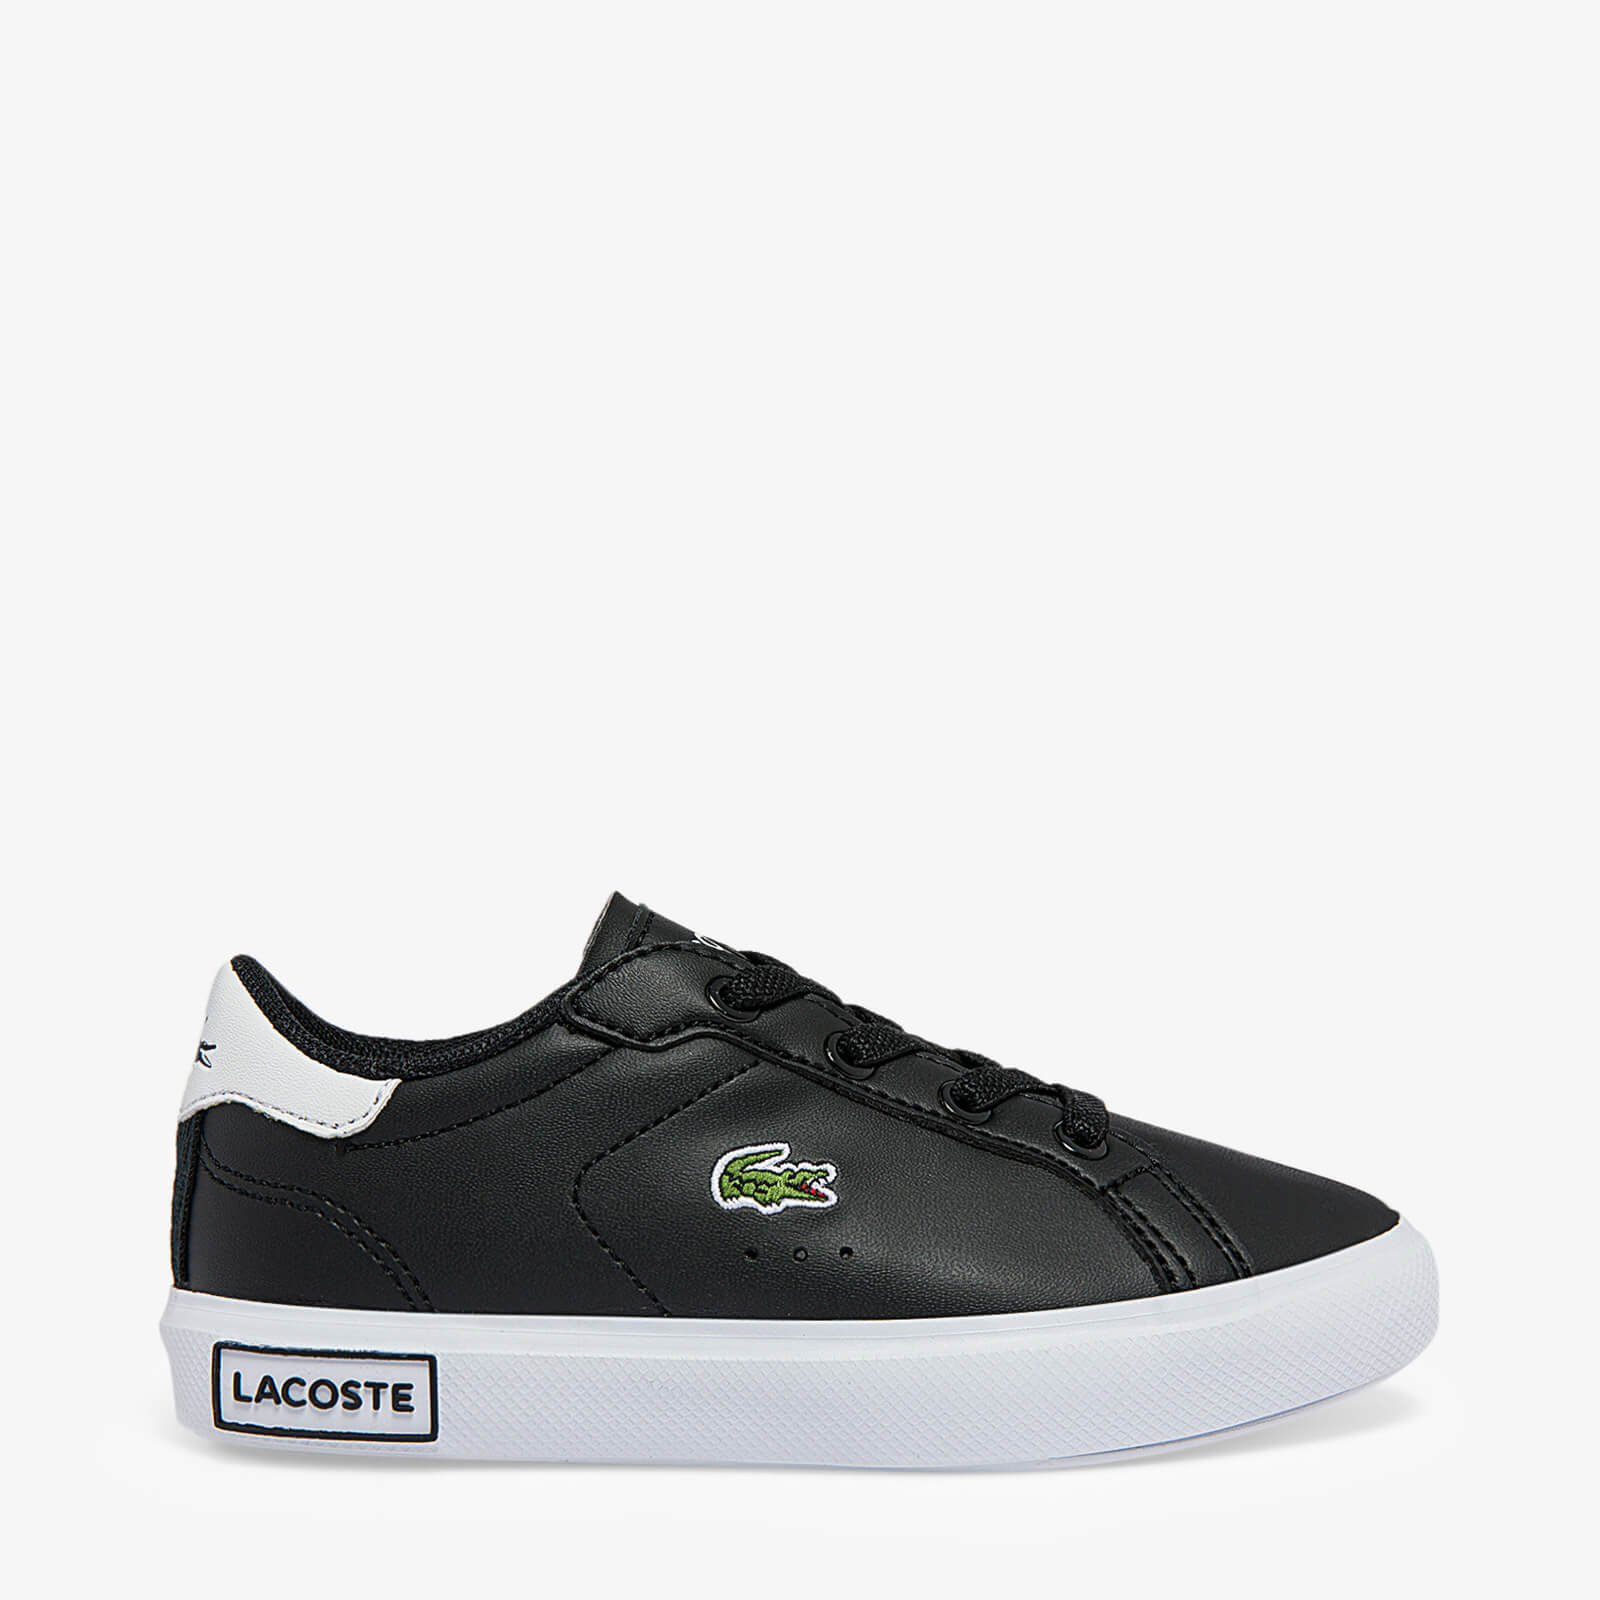 Lacoste Infant Powercourt Trainers - Black - UK 6 Toddler